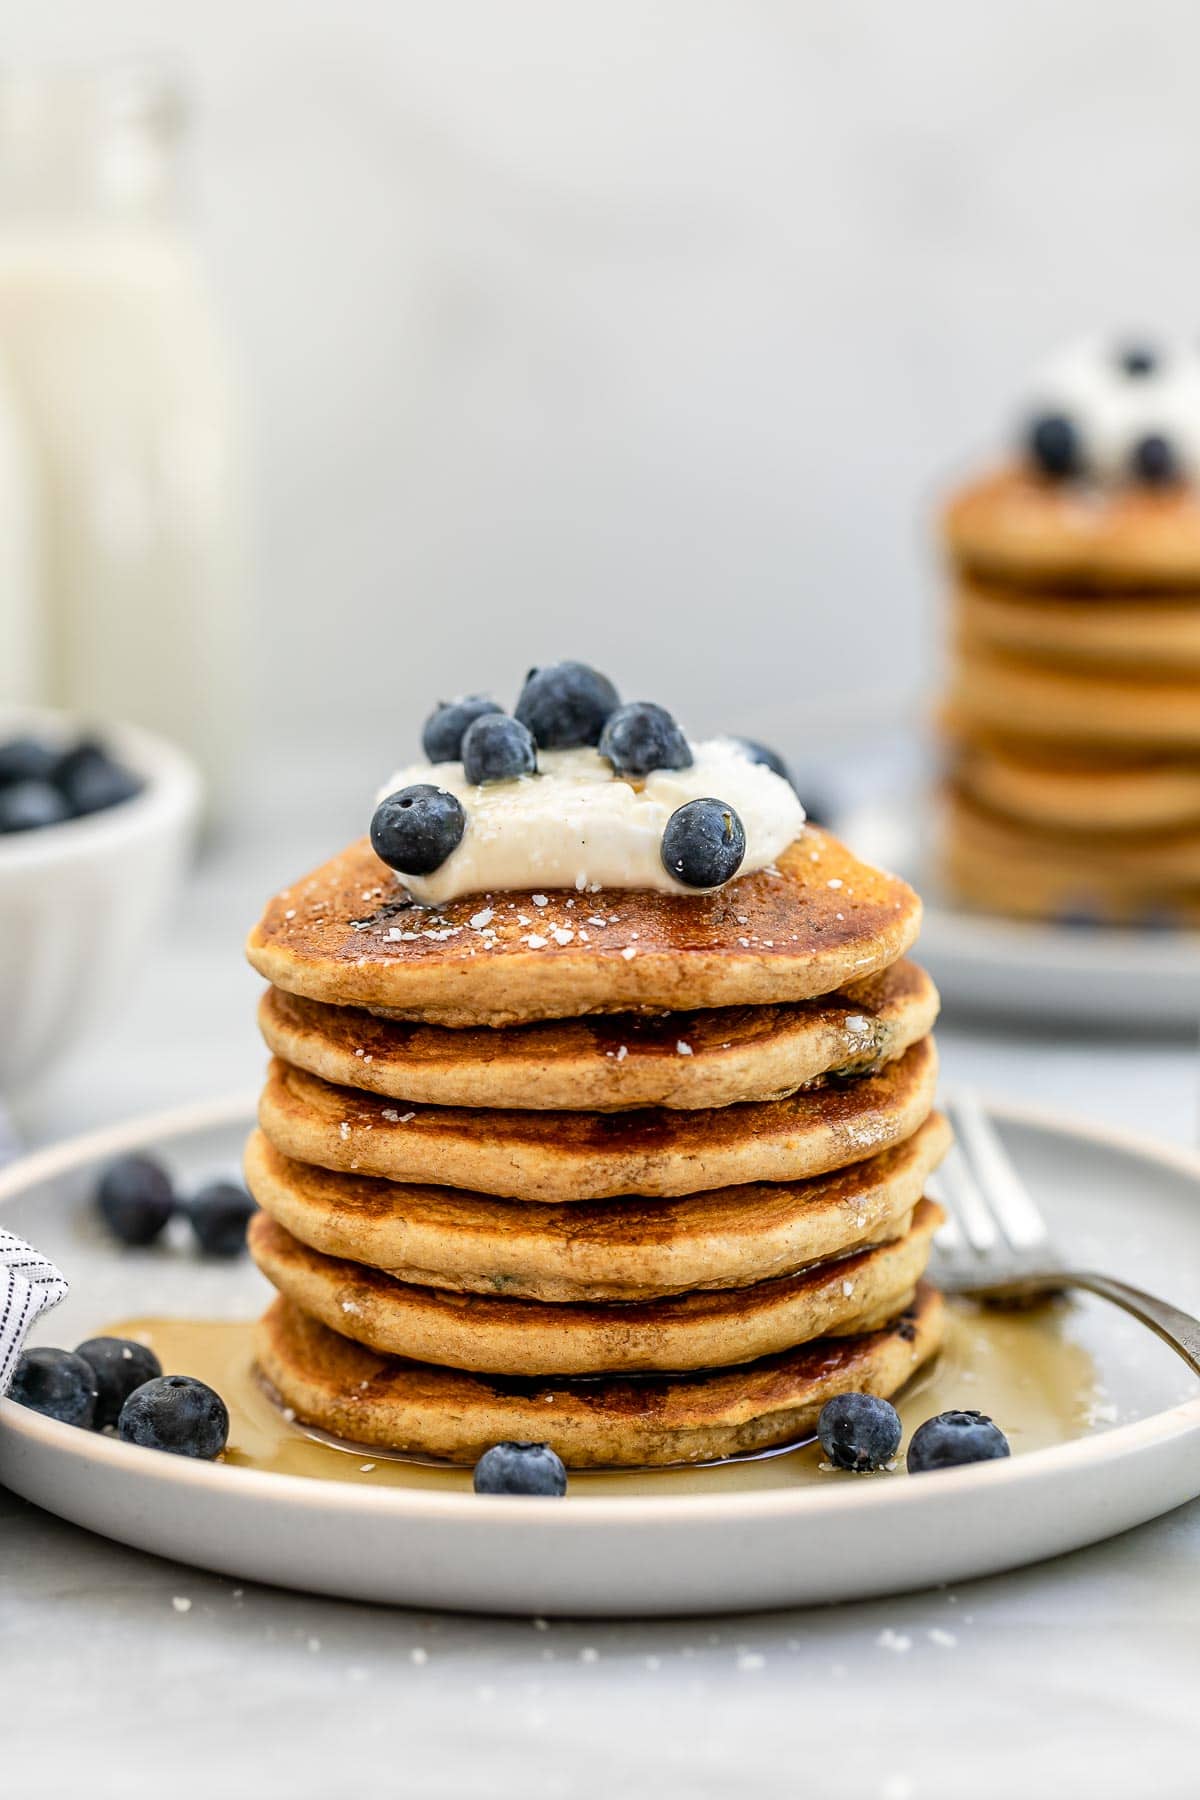 Six vegan blueberry pancakes stacked on each other with yogurt on top.